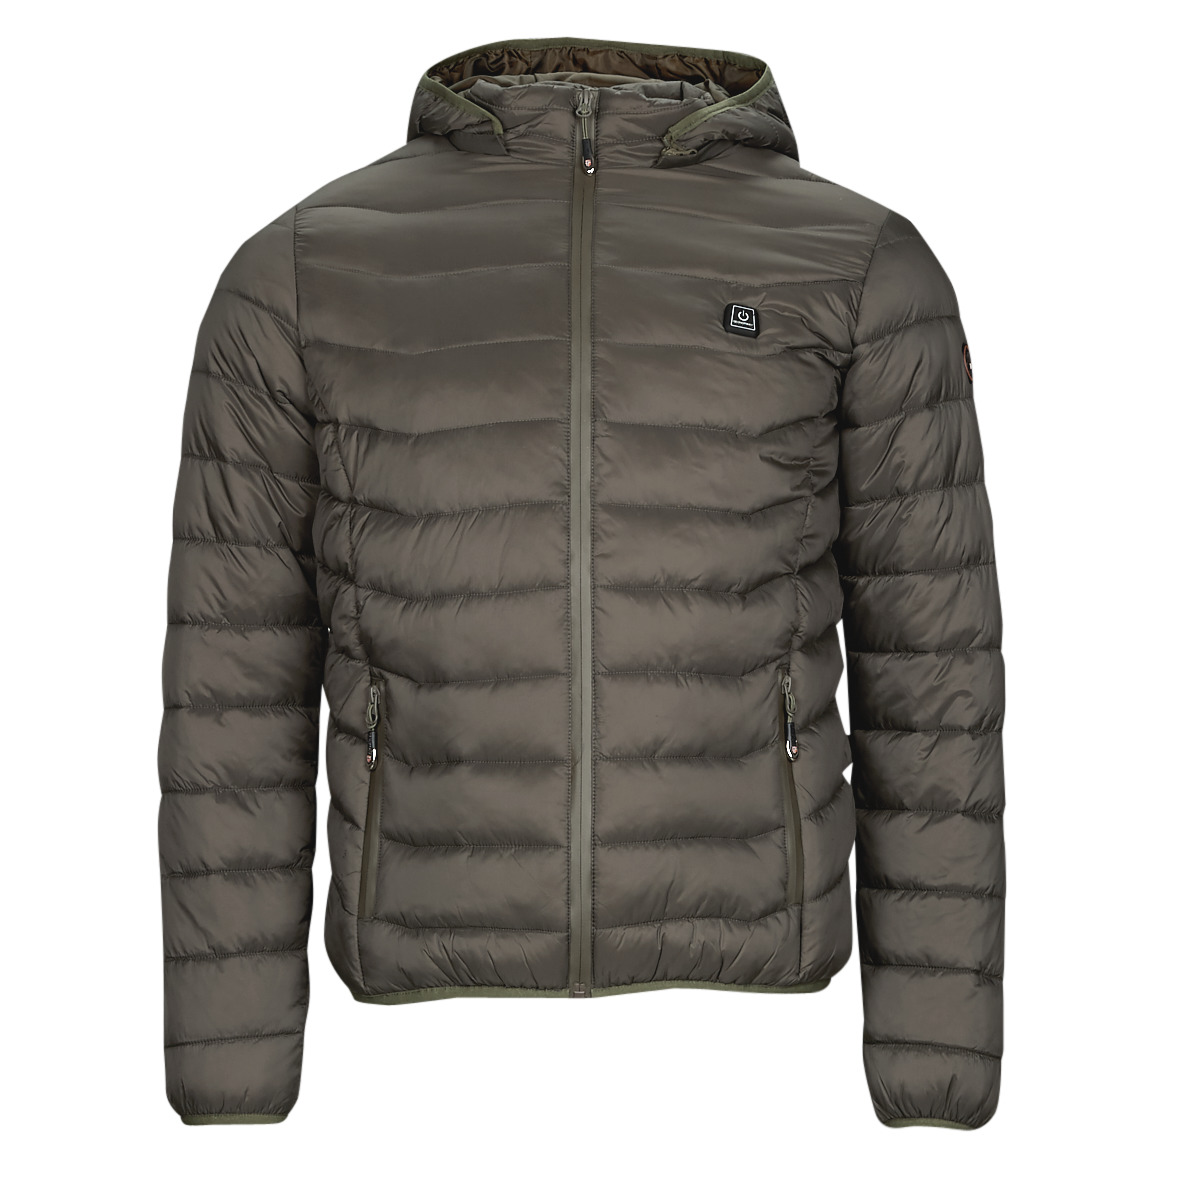 Homme Vêtements Geographical Norway Homme Manteaux & Vestes Geographical Norway Homme Doudounes & Parkas Geographical Norway Homme Doudounes Geographical Norway Homme Doudounes Geographical Norway Homme Doudoune GEOGRAPHICAL NORWAY Autre bleu 